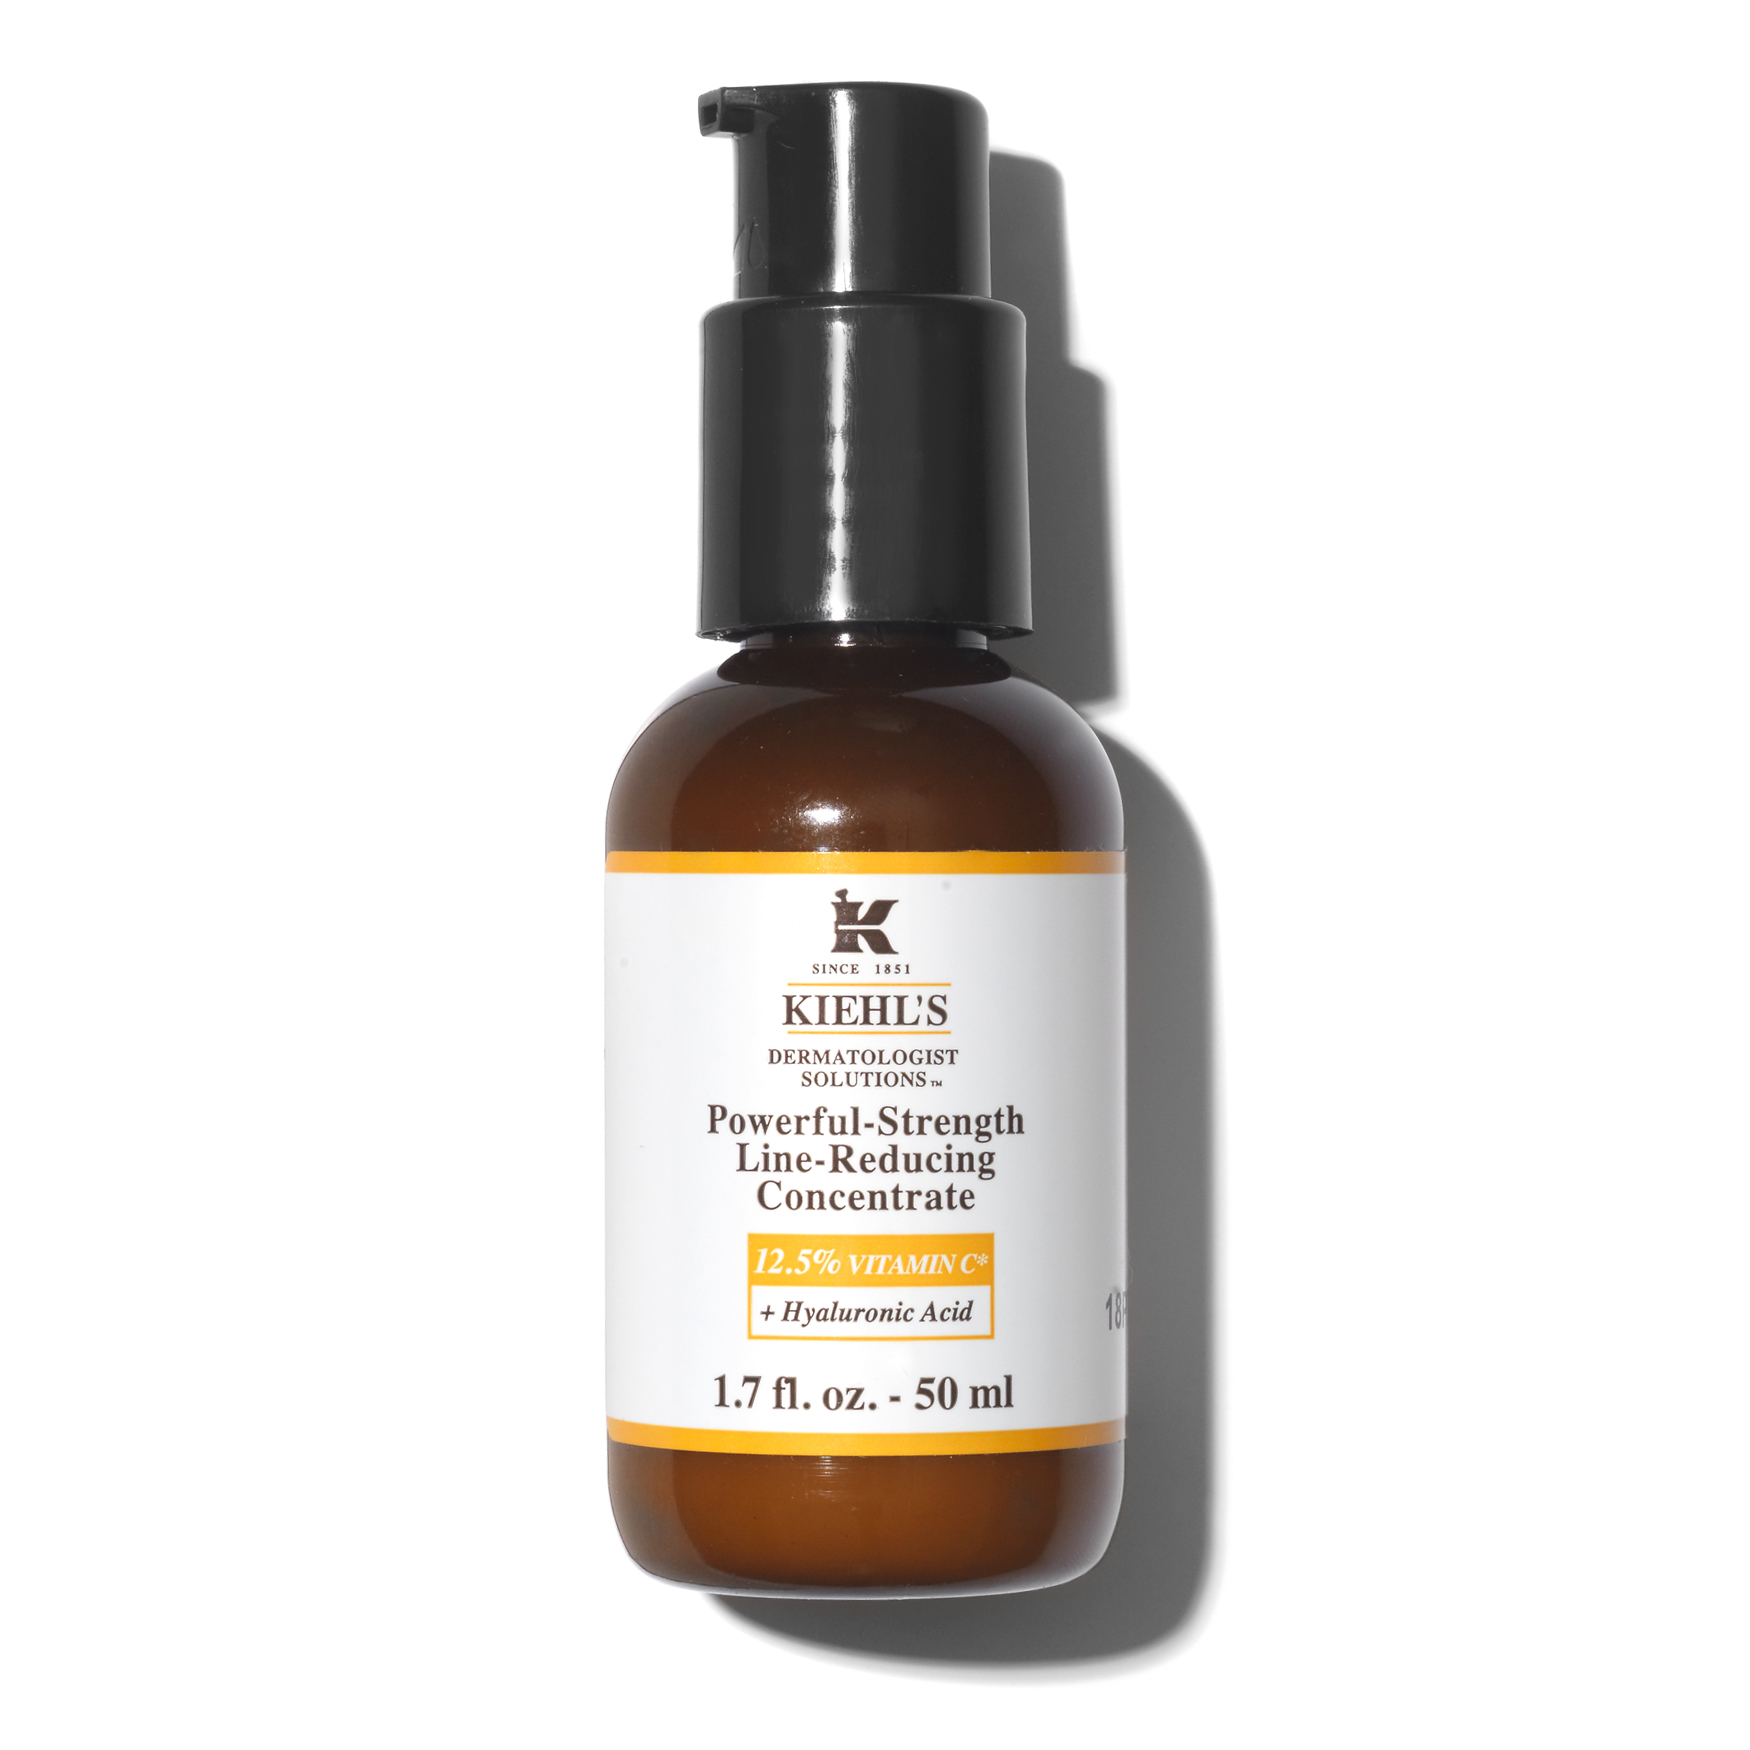 Kiehl's Powerful-Strength Concentrate | NK